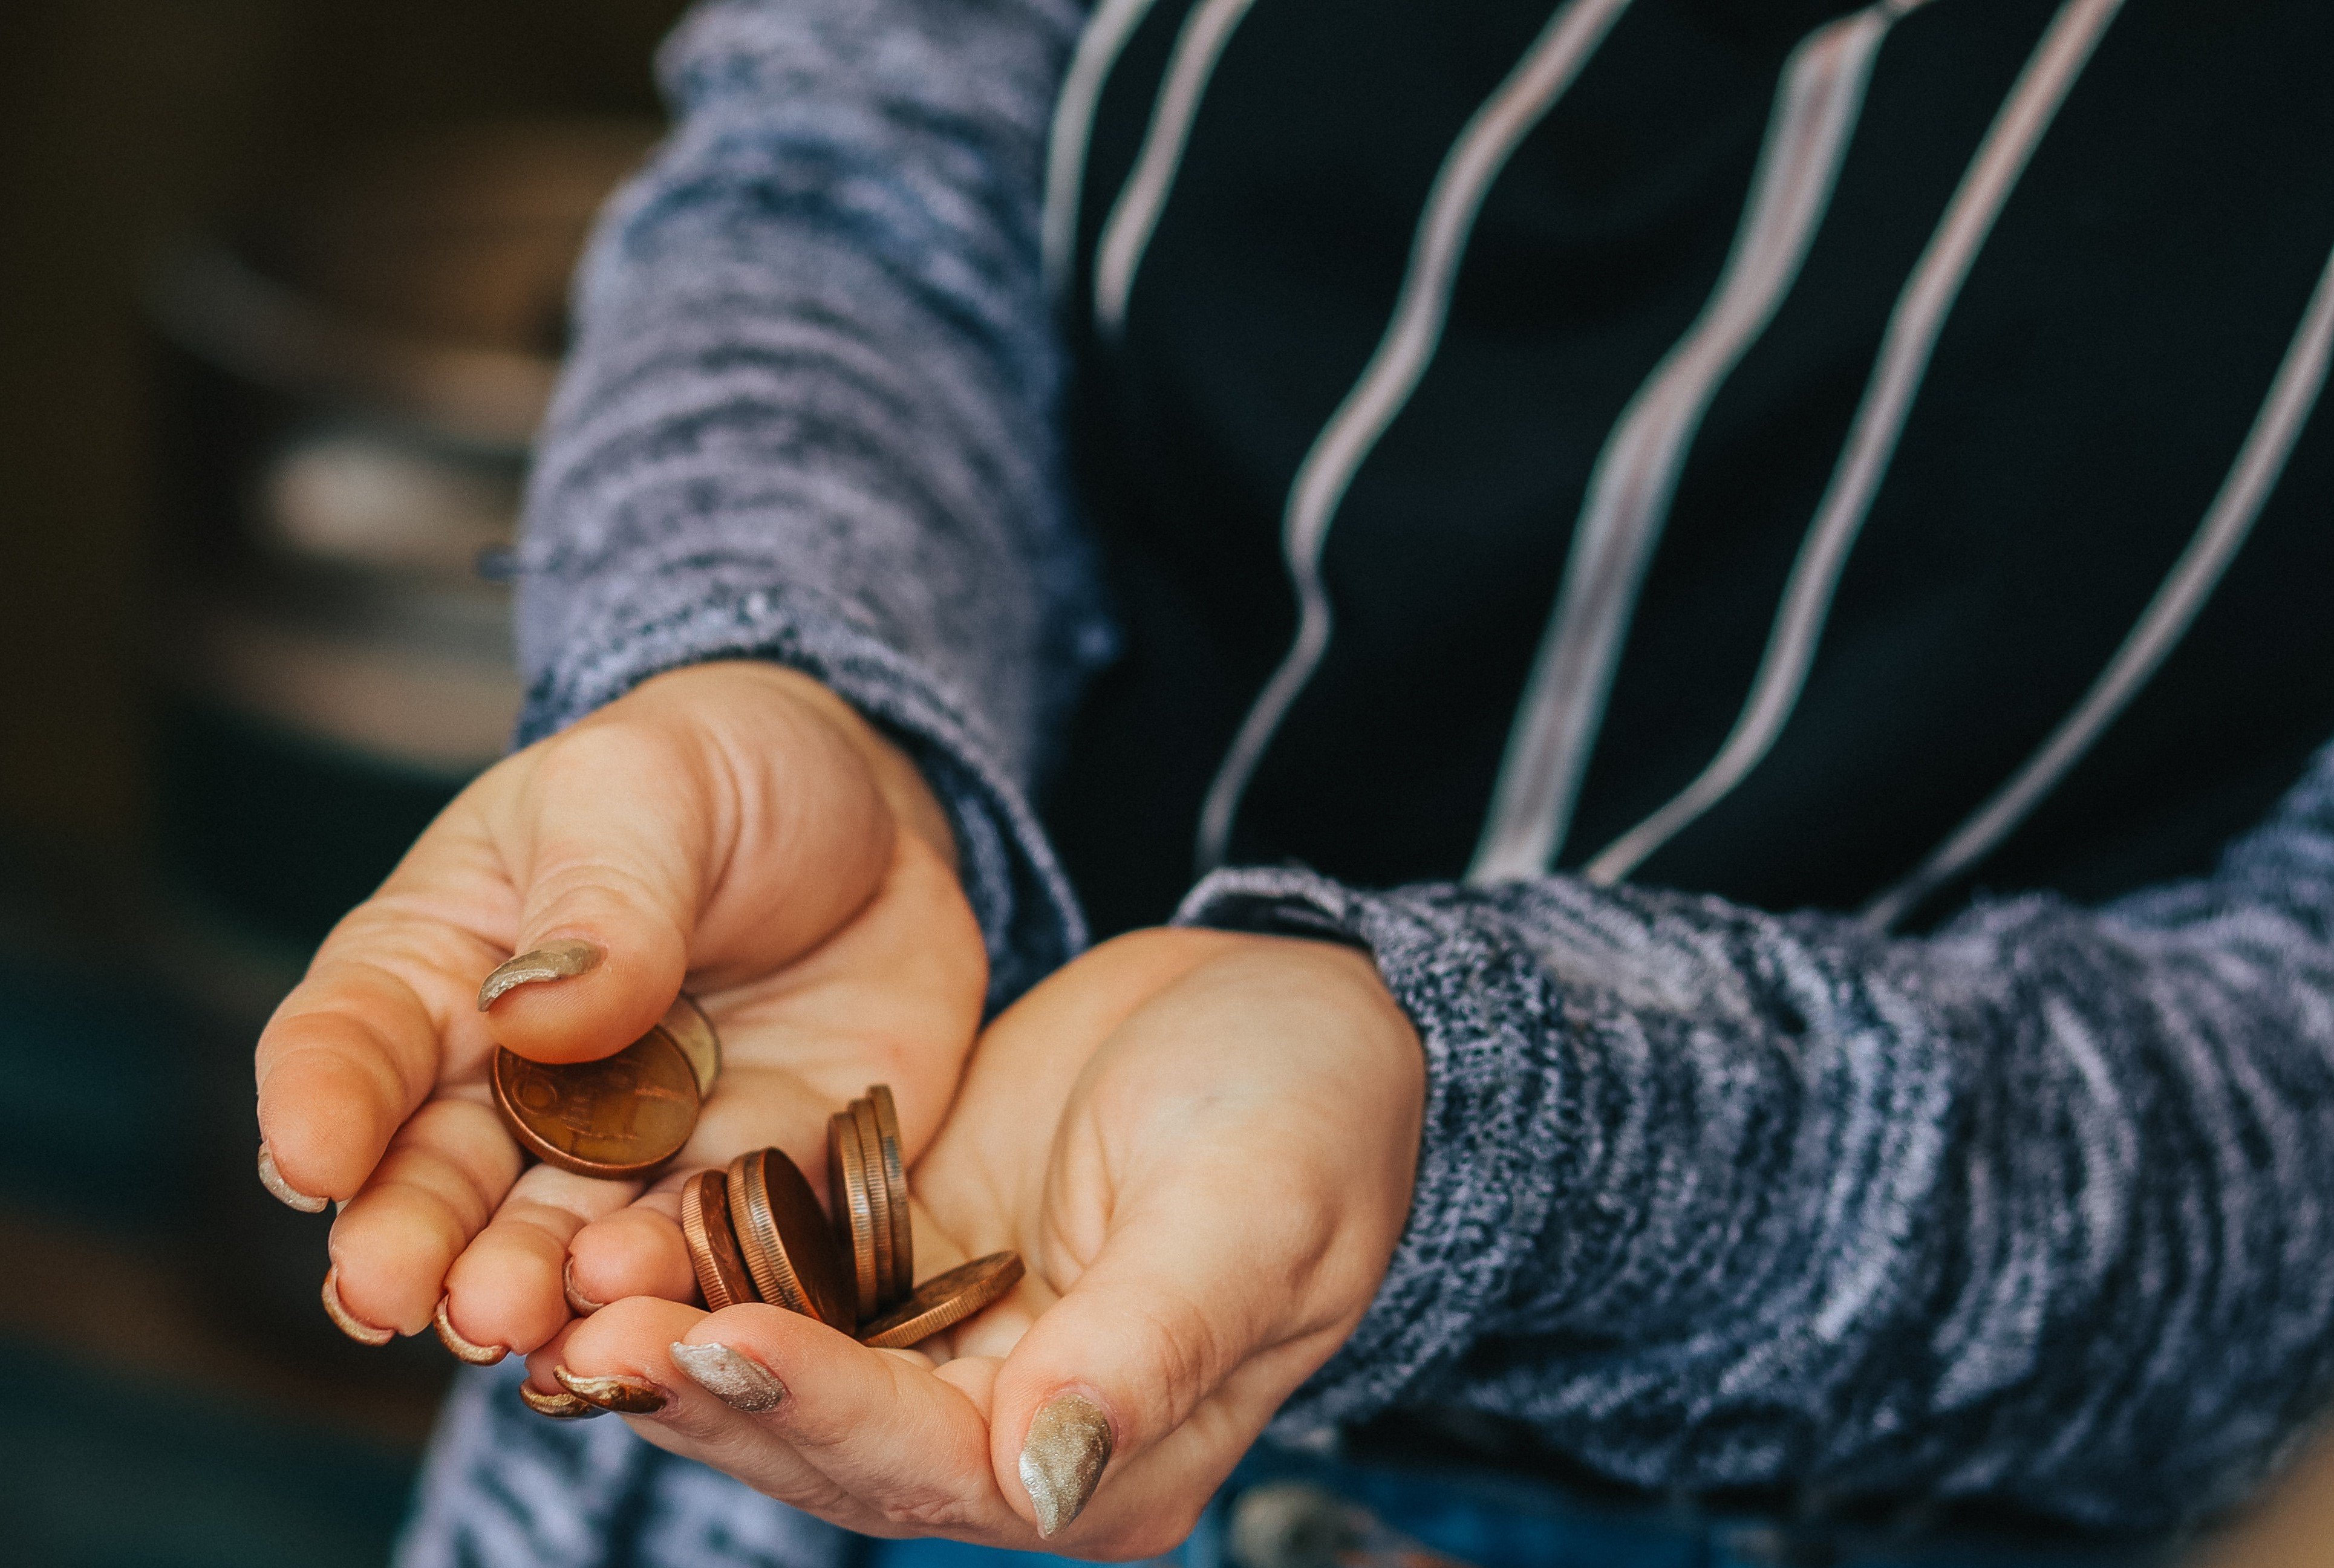 The guy dropped some pennies in his mother's hands | Photo: Pexels